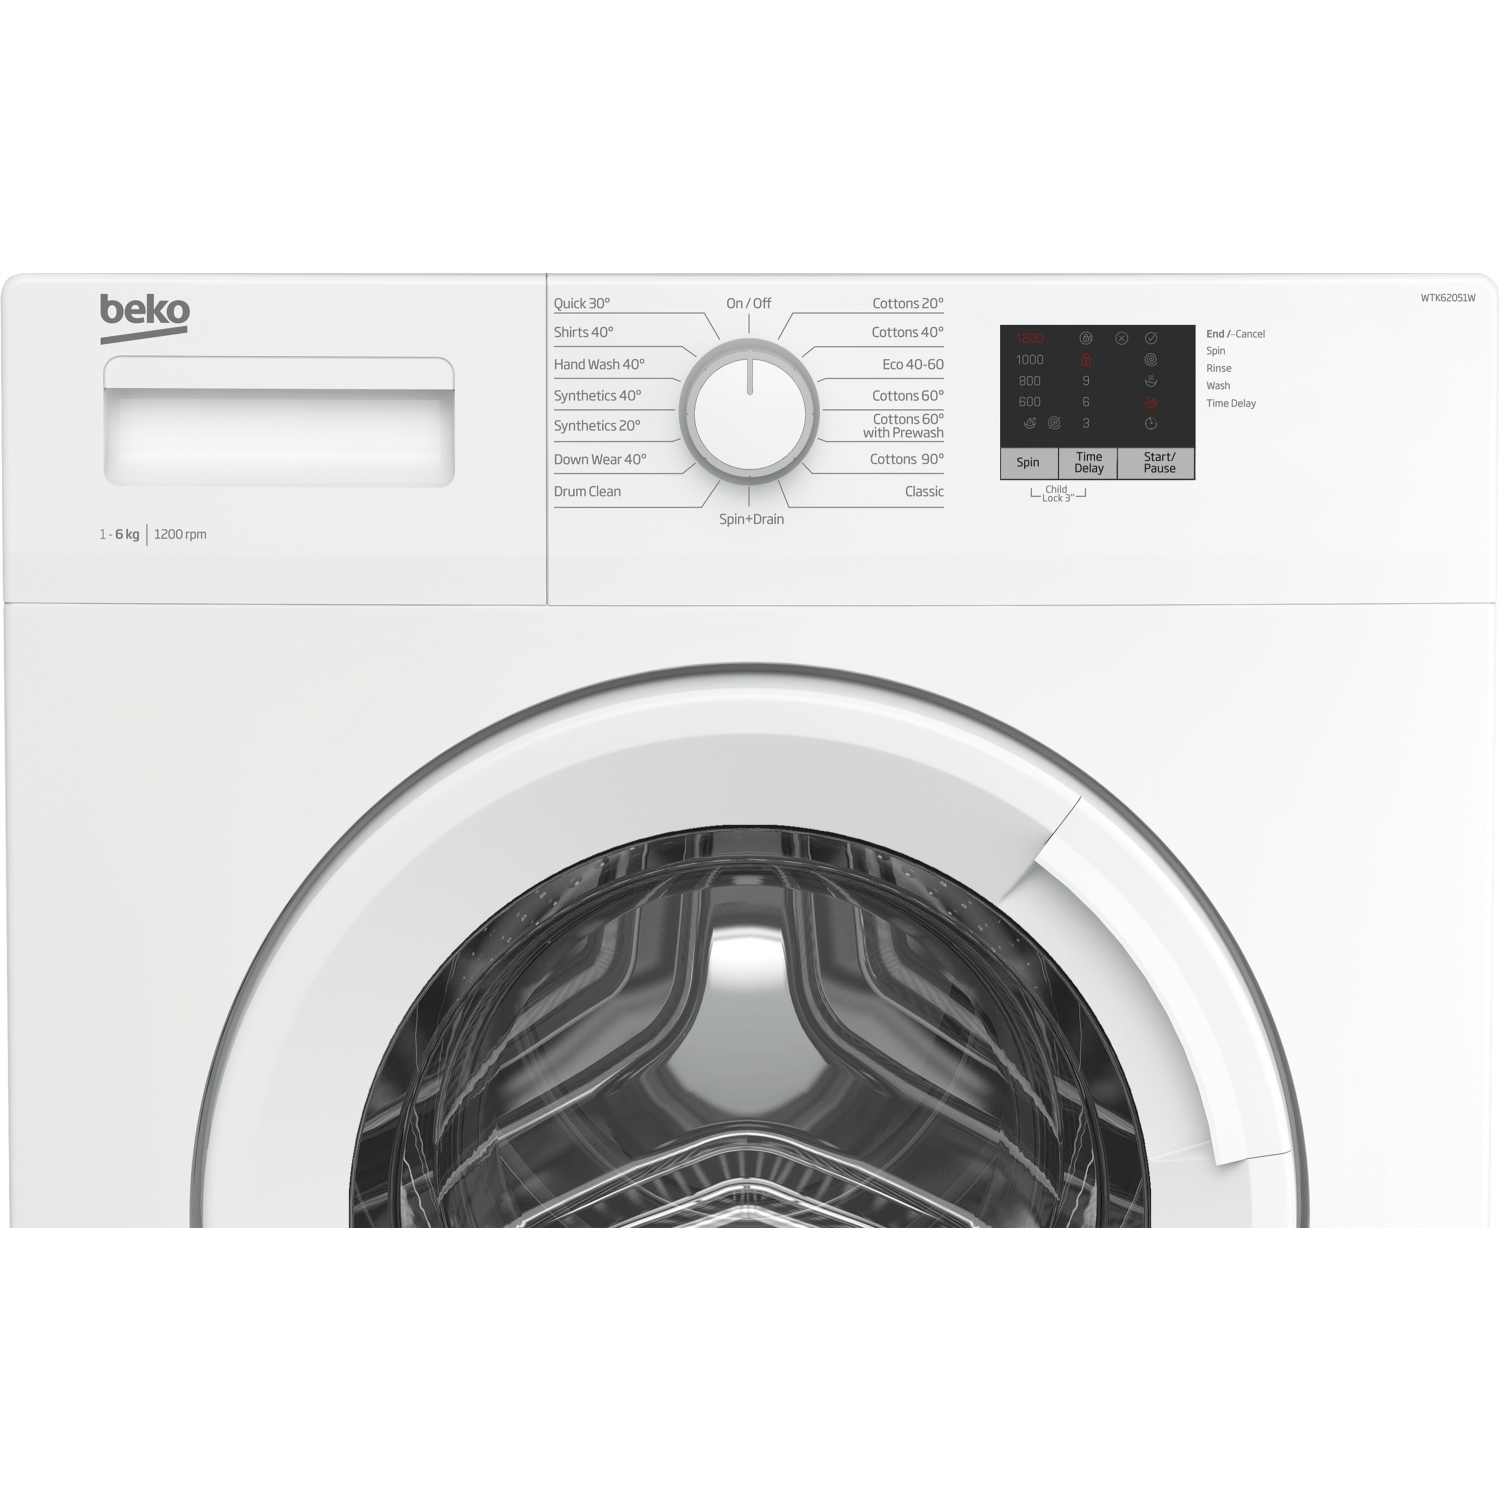 Beko WTK62051W 6Kg Washing Machine with 1200 rpm - White - A+++ Rated - 1